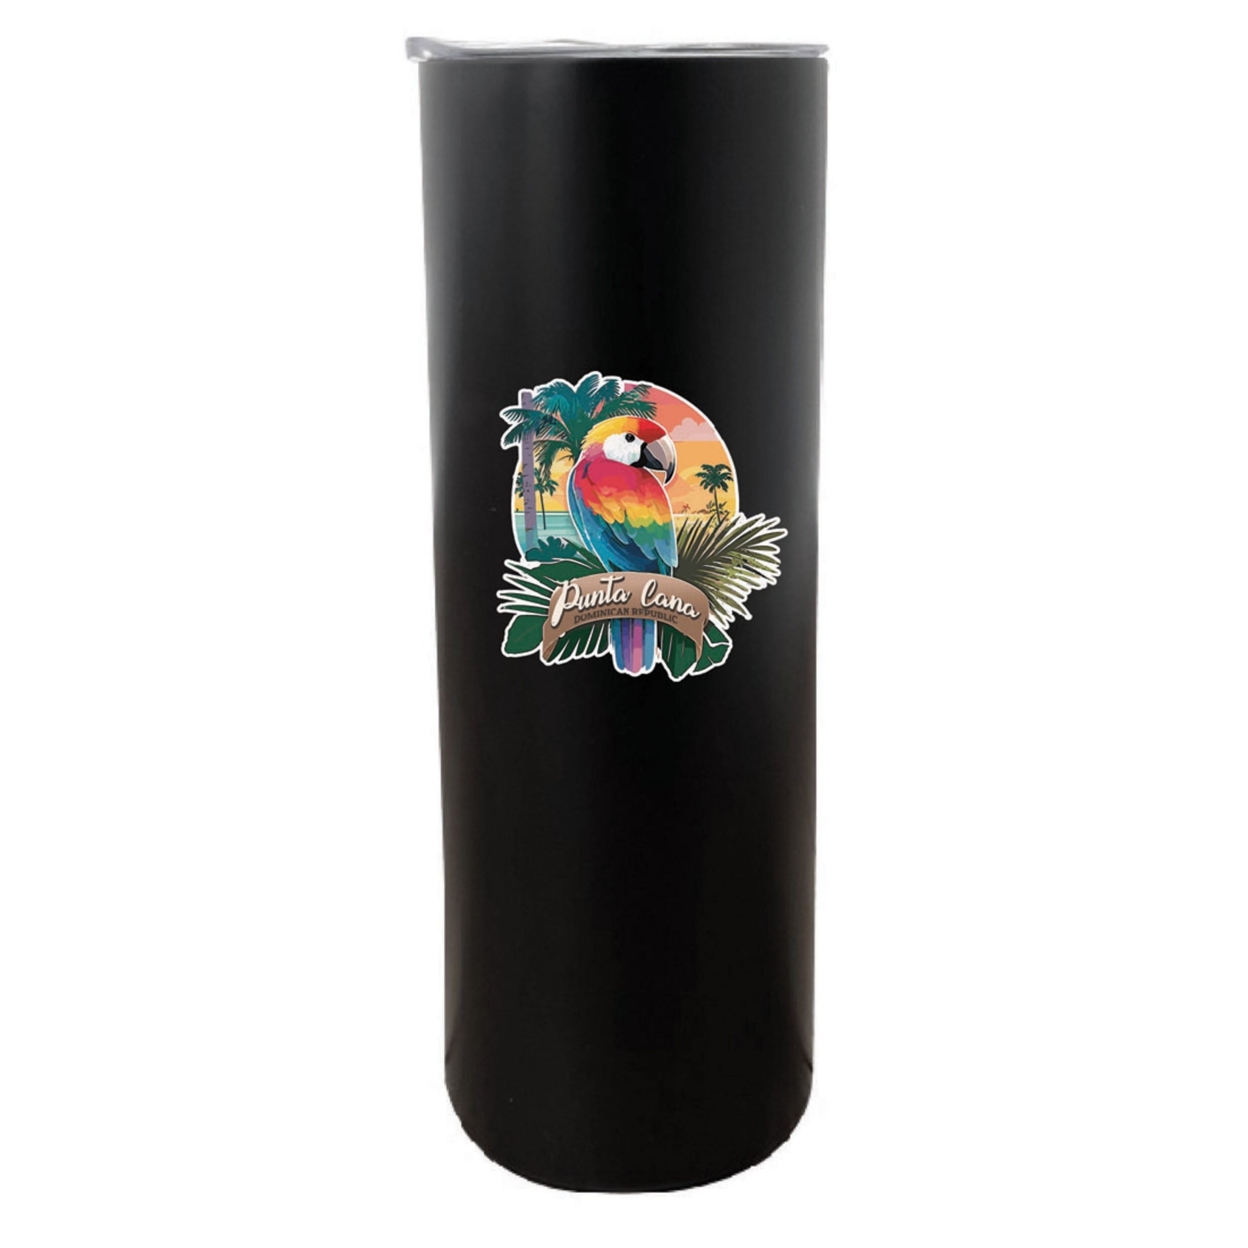 Punta Cana Dominican Republic Souvenir 20 Oz Insulated Stainless Steel Skinny Tumbler - Rainbow Glitter Gray, PALM